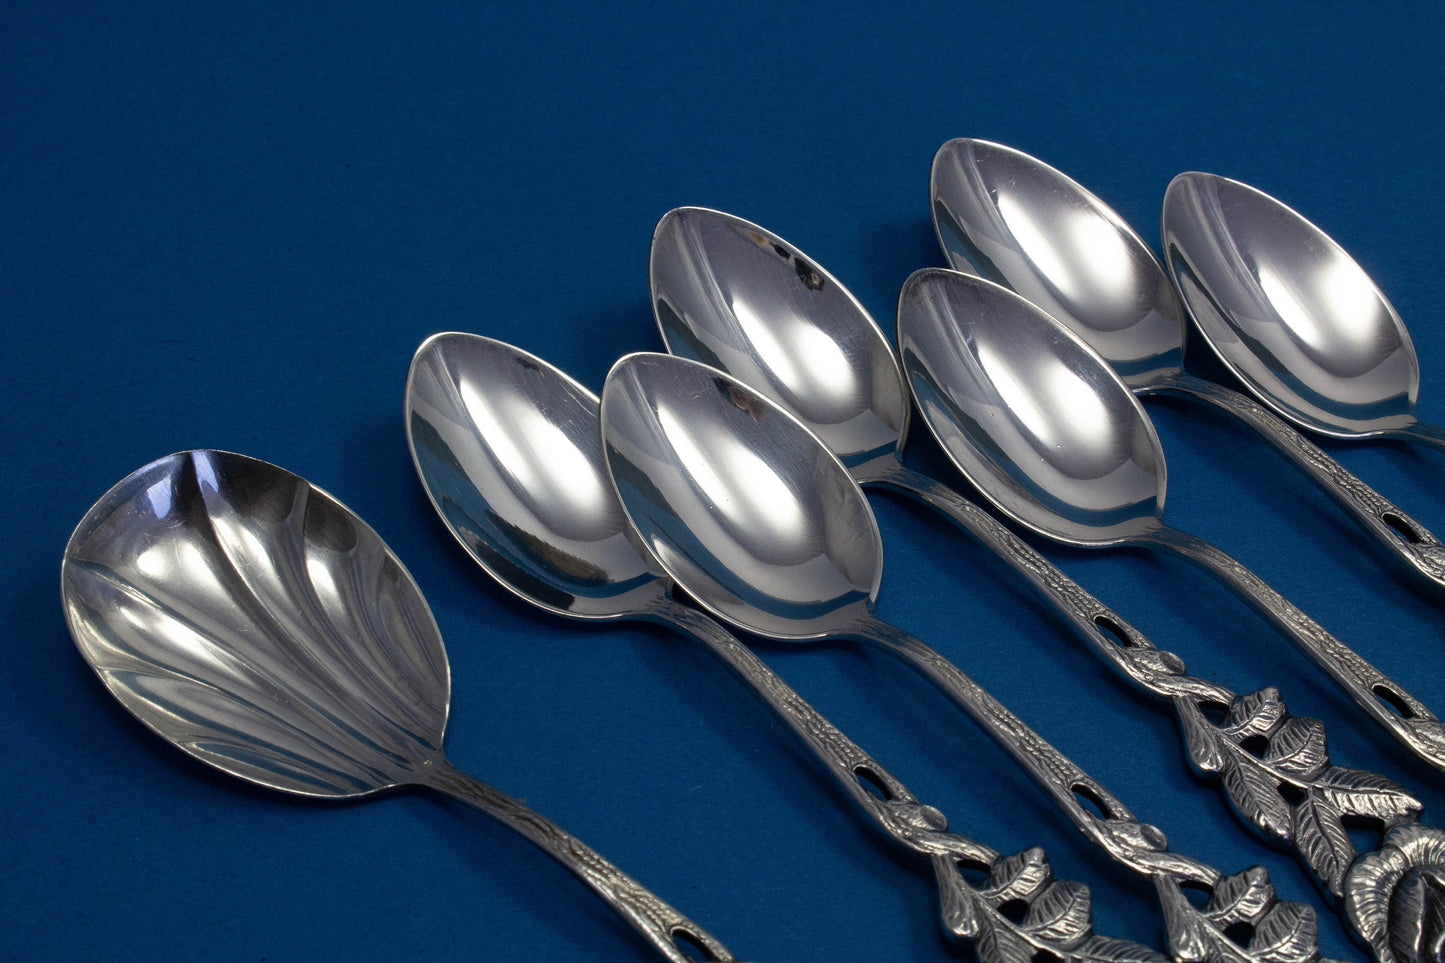 6 small mocha spoons with a matching sugar spoon